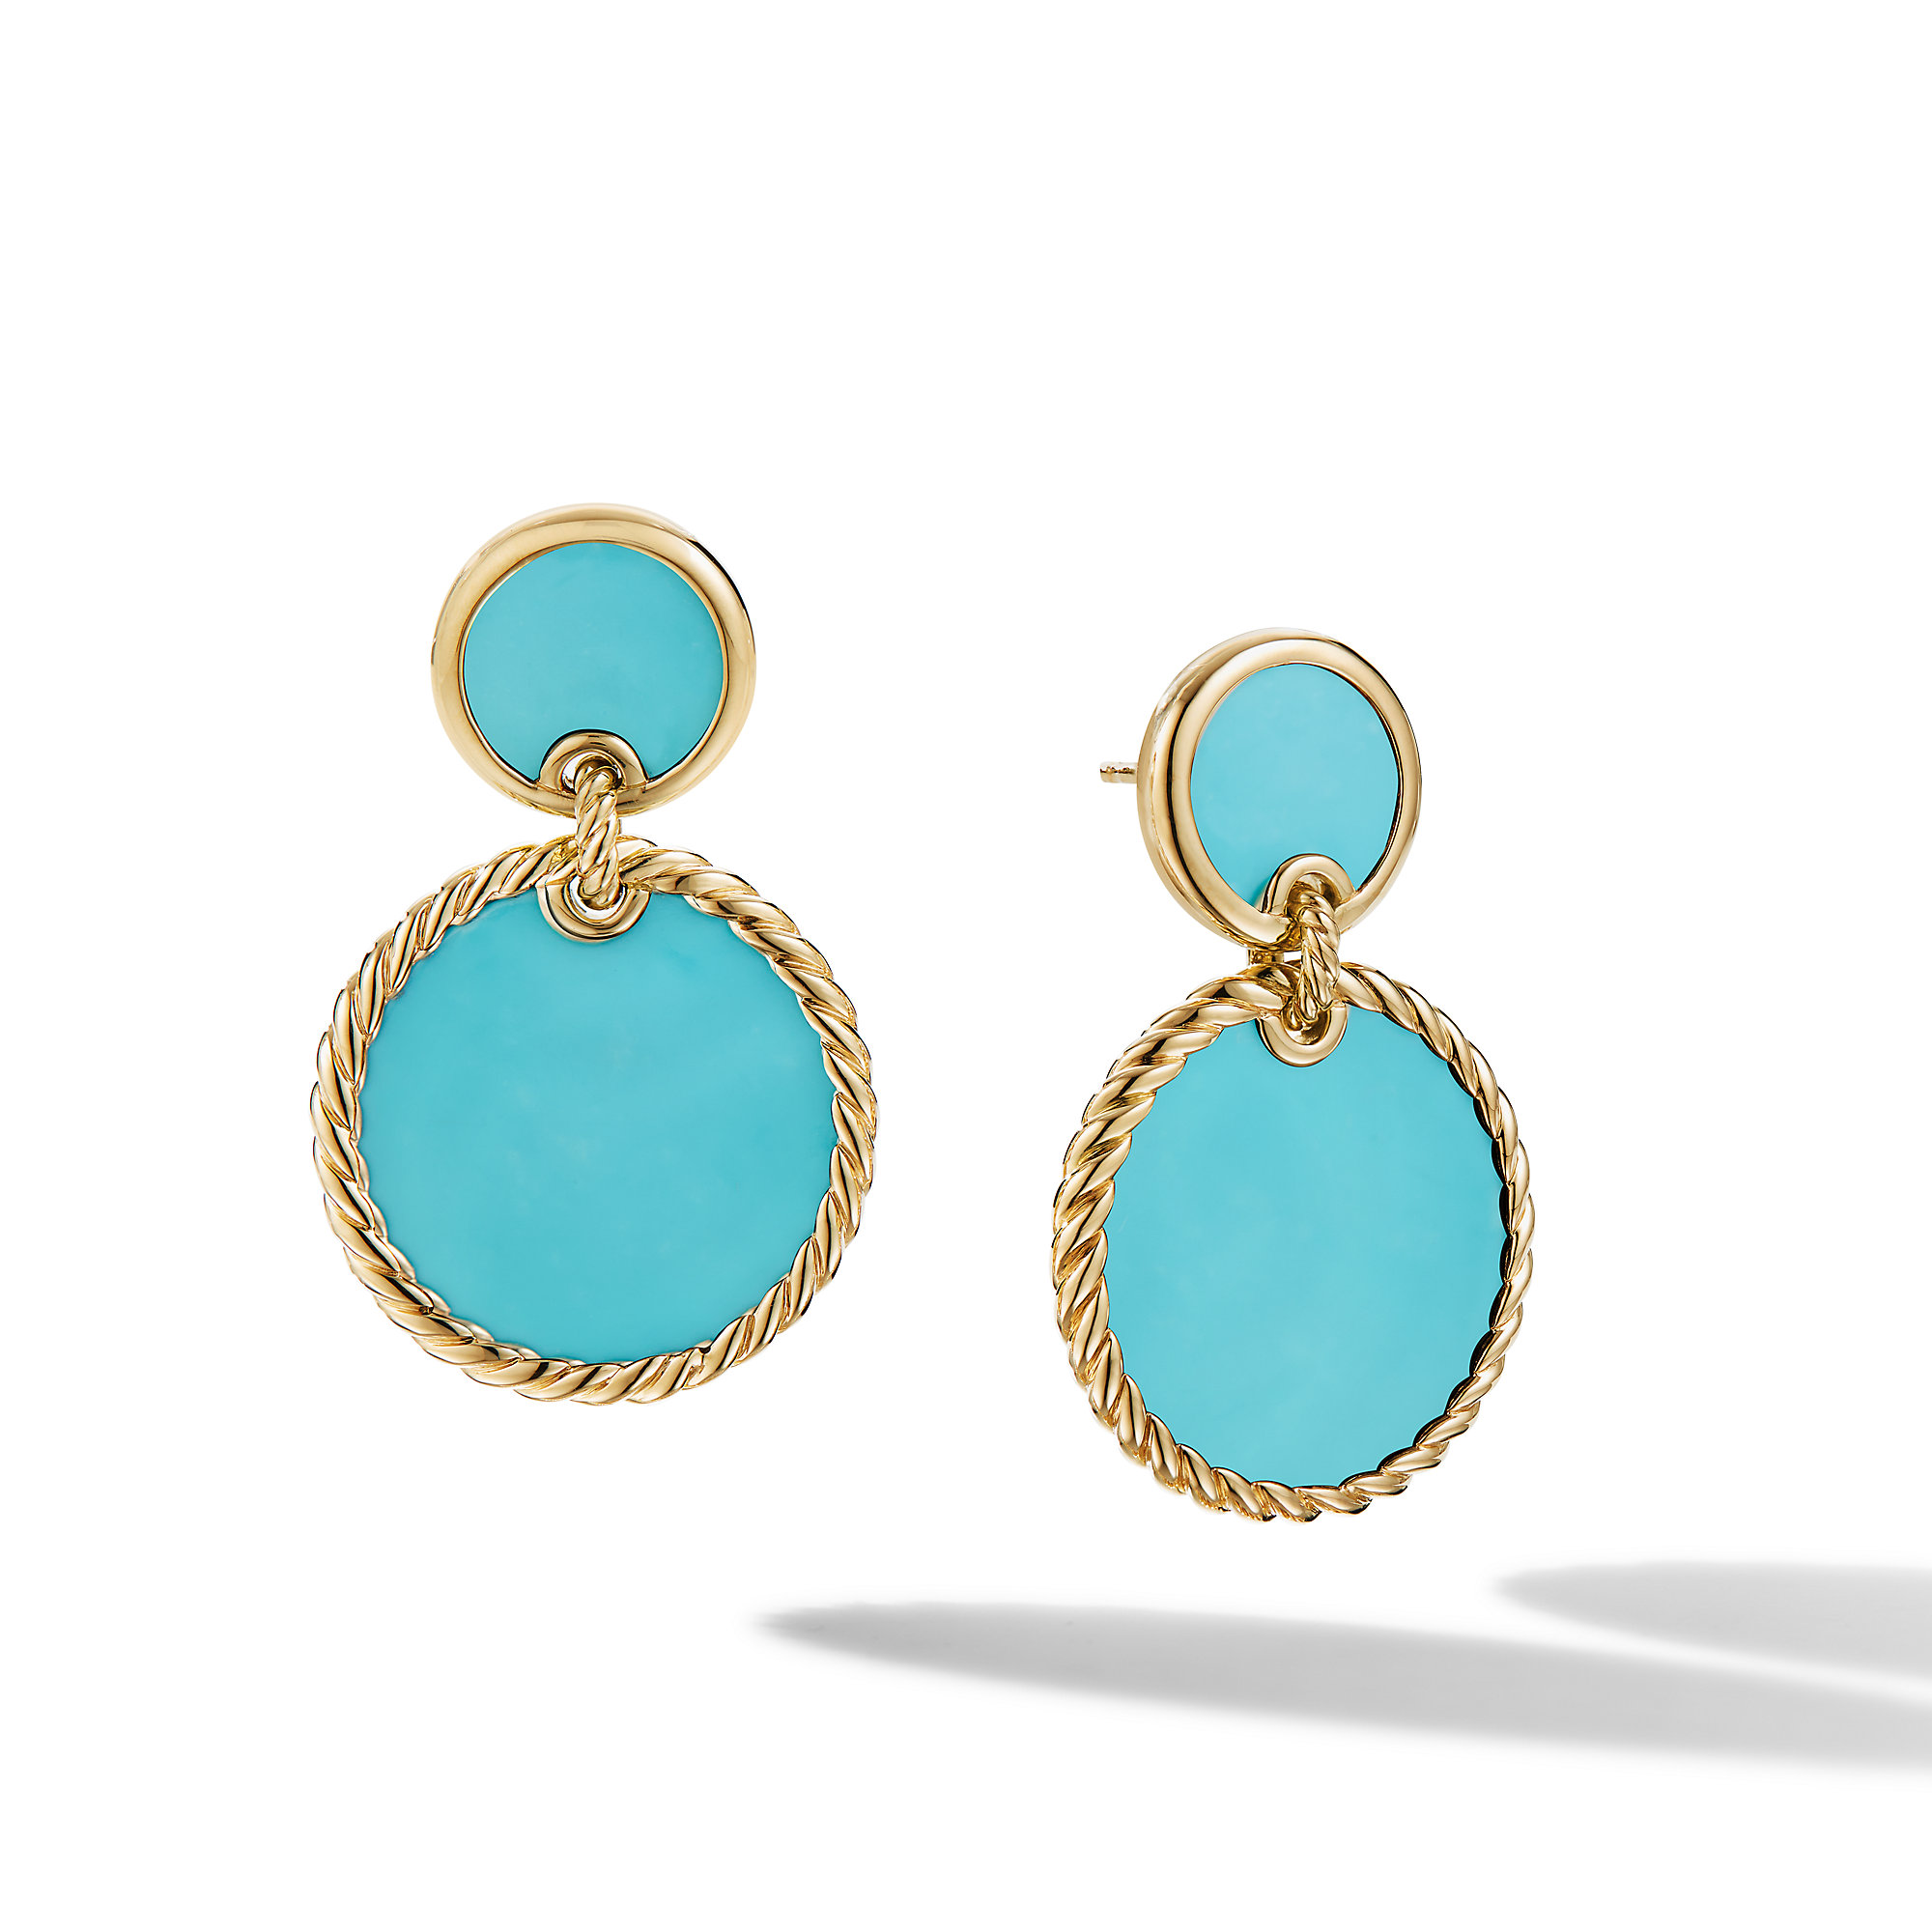 DY Elements® Double Drop Earrings in 18K Yellow Gold with Turquoise